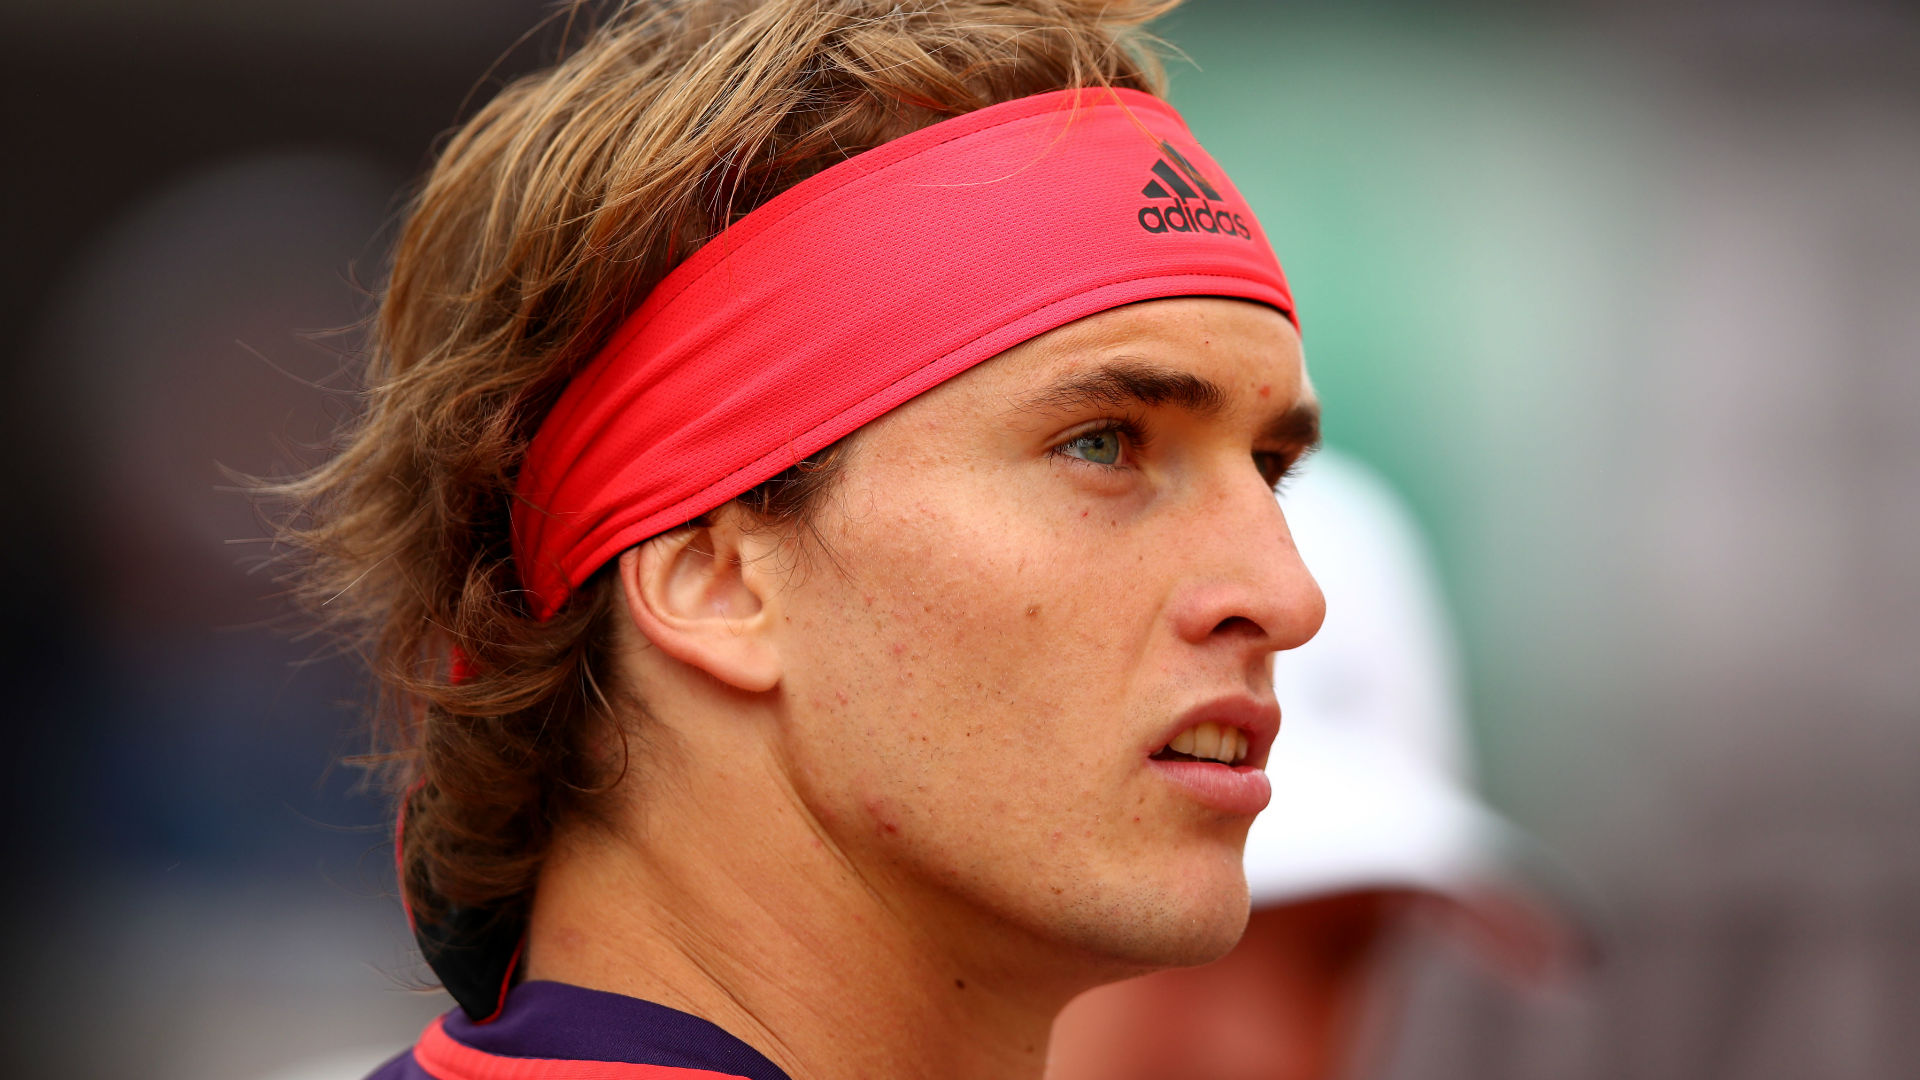 Geneva Open glory could prove to be a springboard for Alexander Zverev, who heads to Roland Garros as fifth seed after a tough 2019 so far.